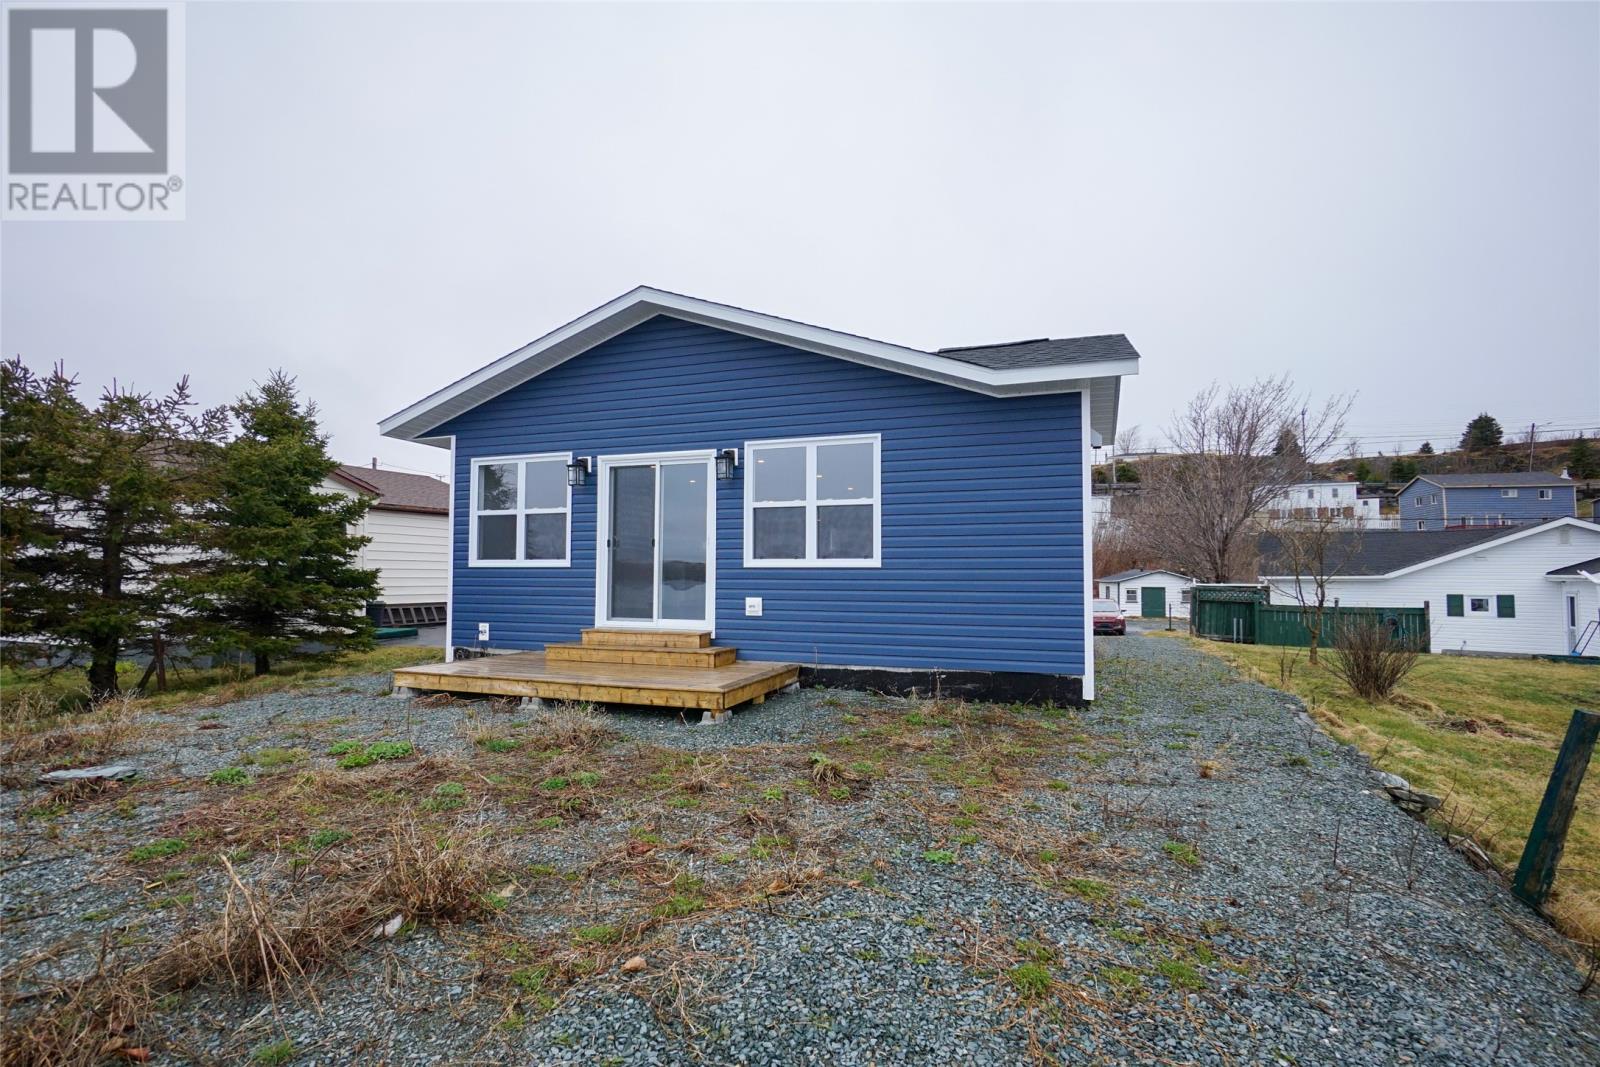 18A Mercers Cove, Bay Roberts, A0A1G0, 2 Bedrooms Bedrooms, ,1 BathroomBathrooms,Single Family,For sale,Mercers,1269861